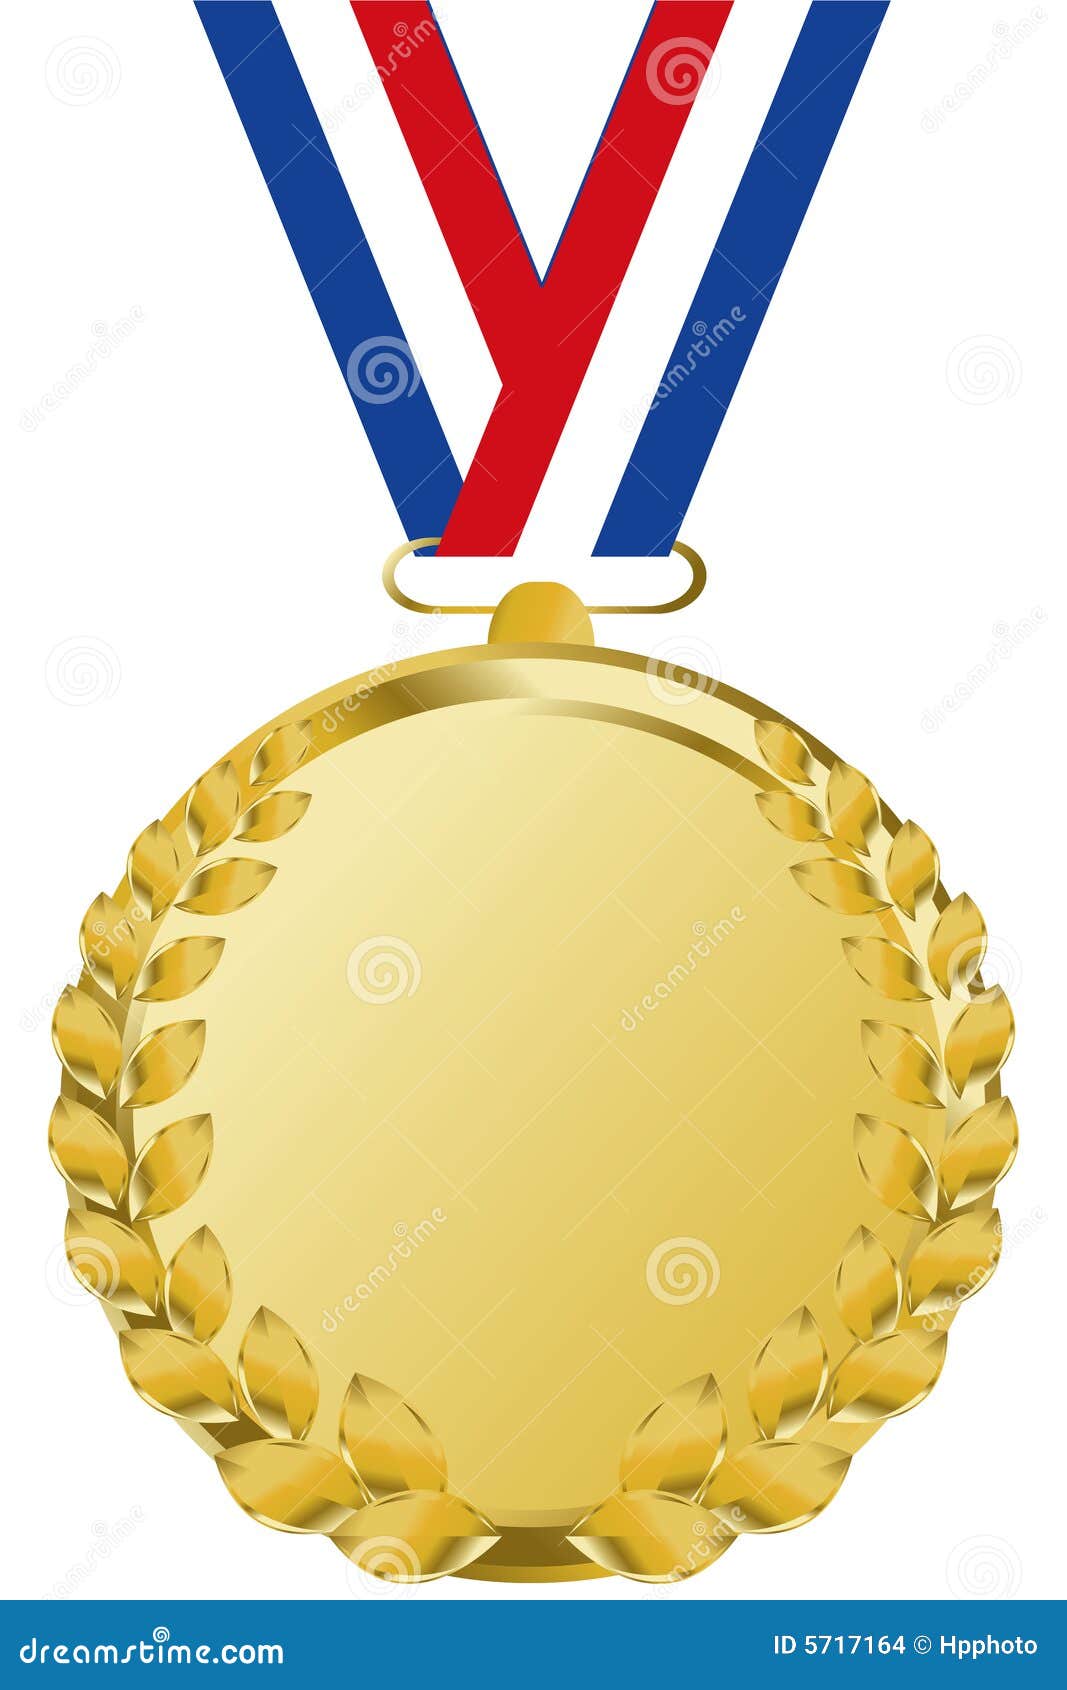 gold medals clipart - photo #23